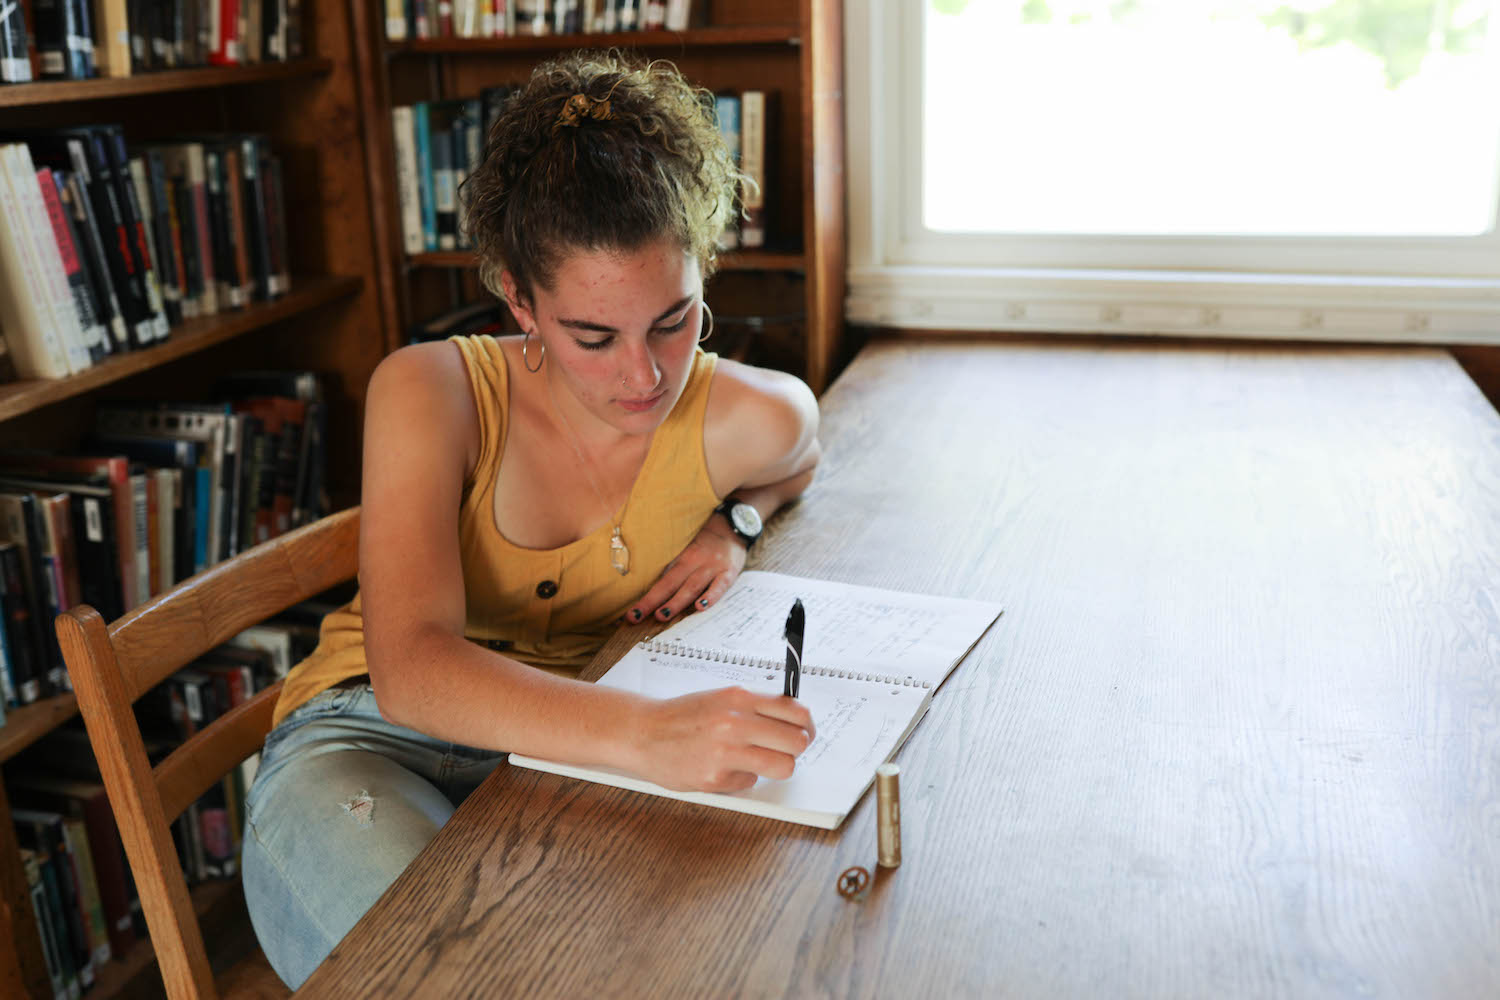 Girl in yellow shirt writing in a notebook